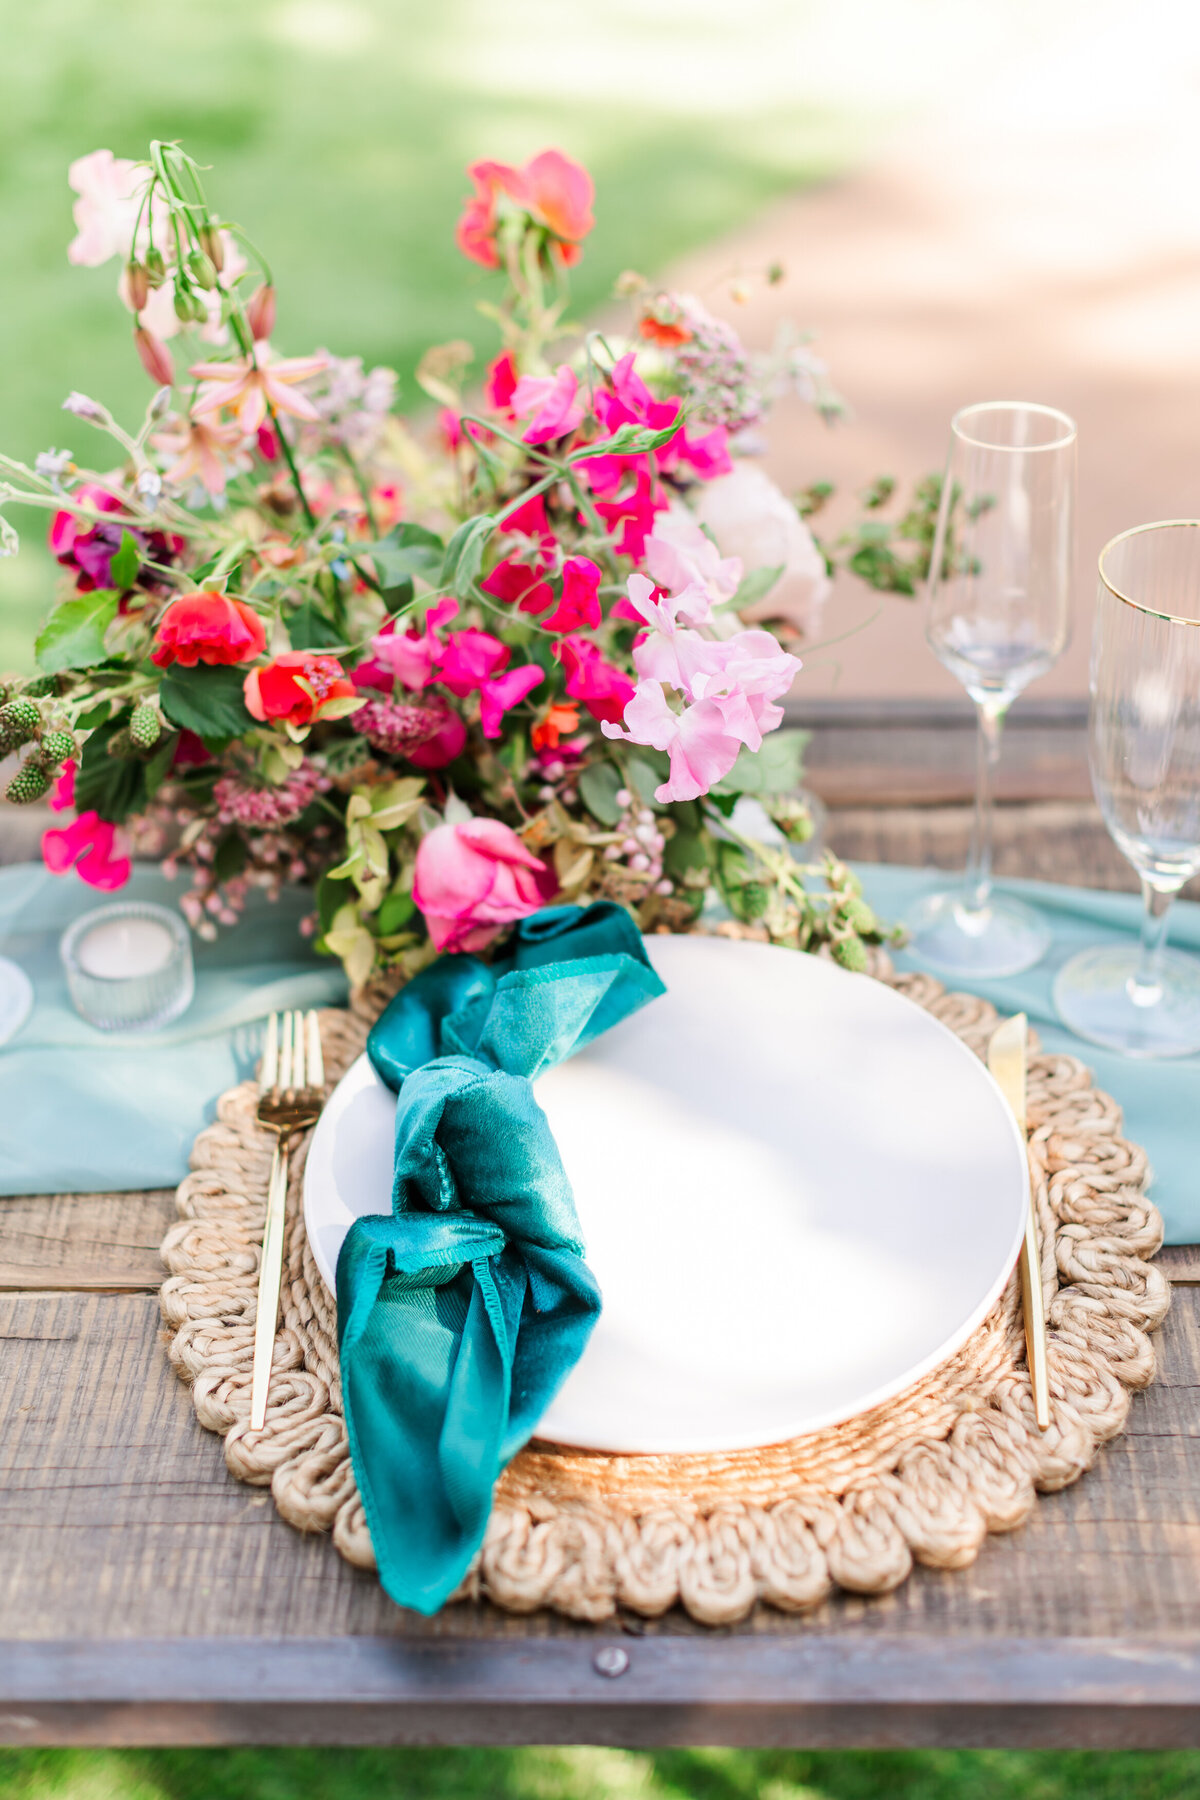 place-setting-detail-photo-1